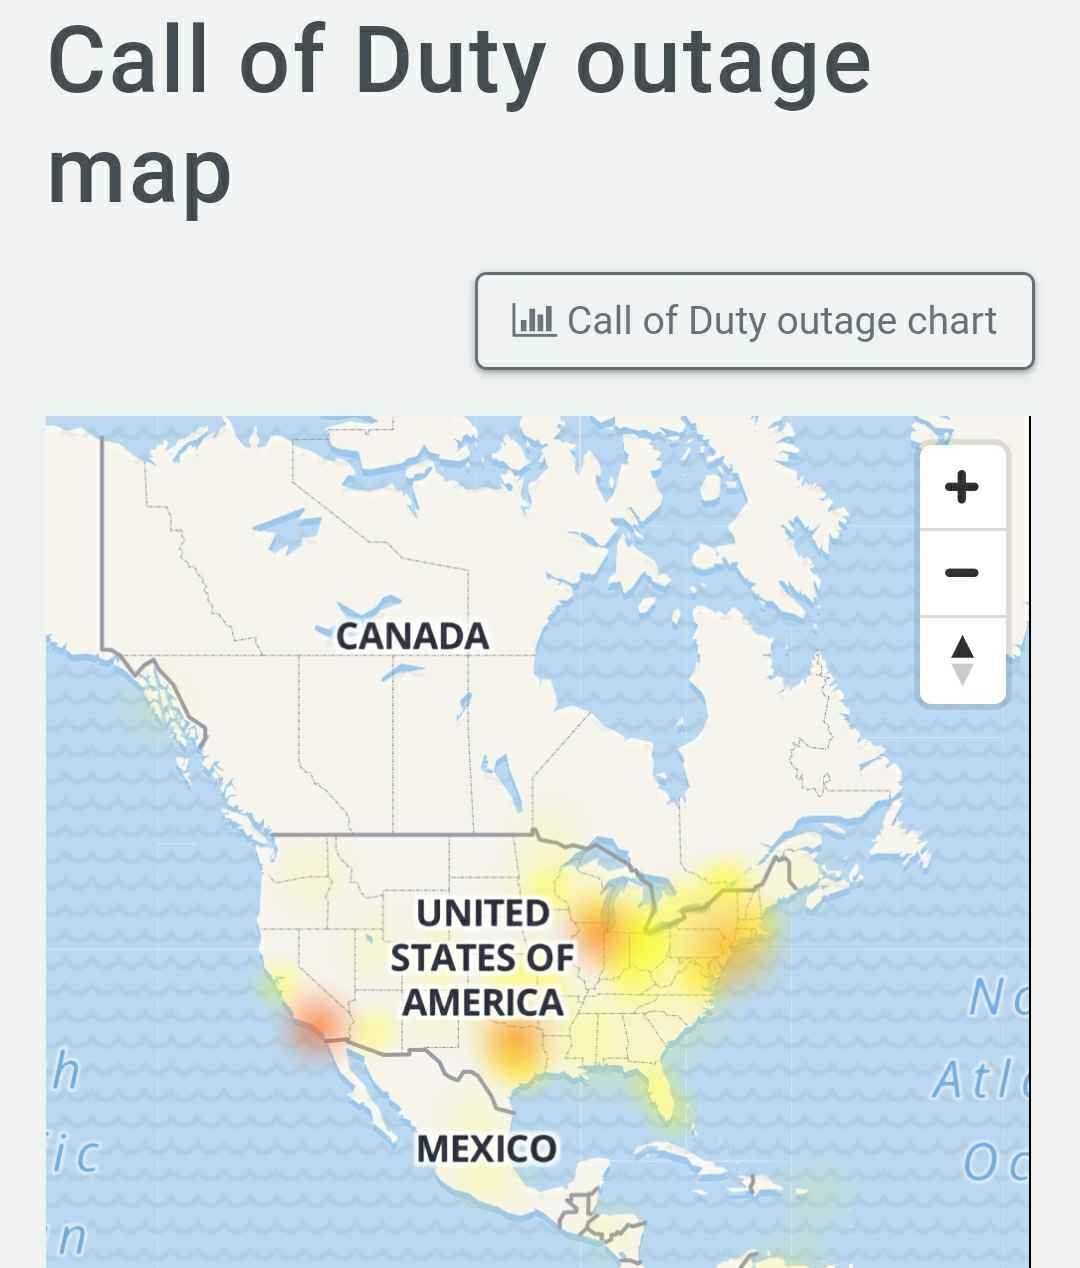 call of duty cold war servers down today